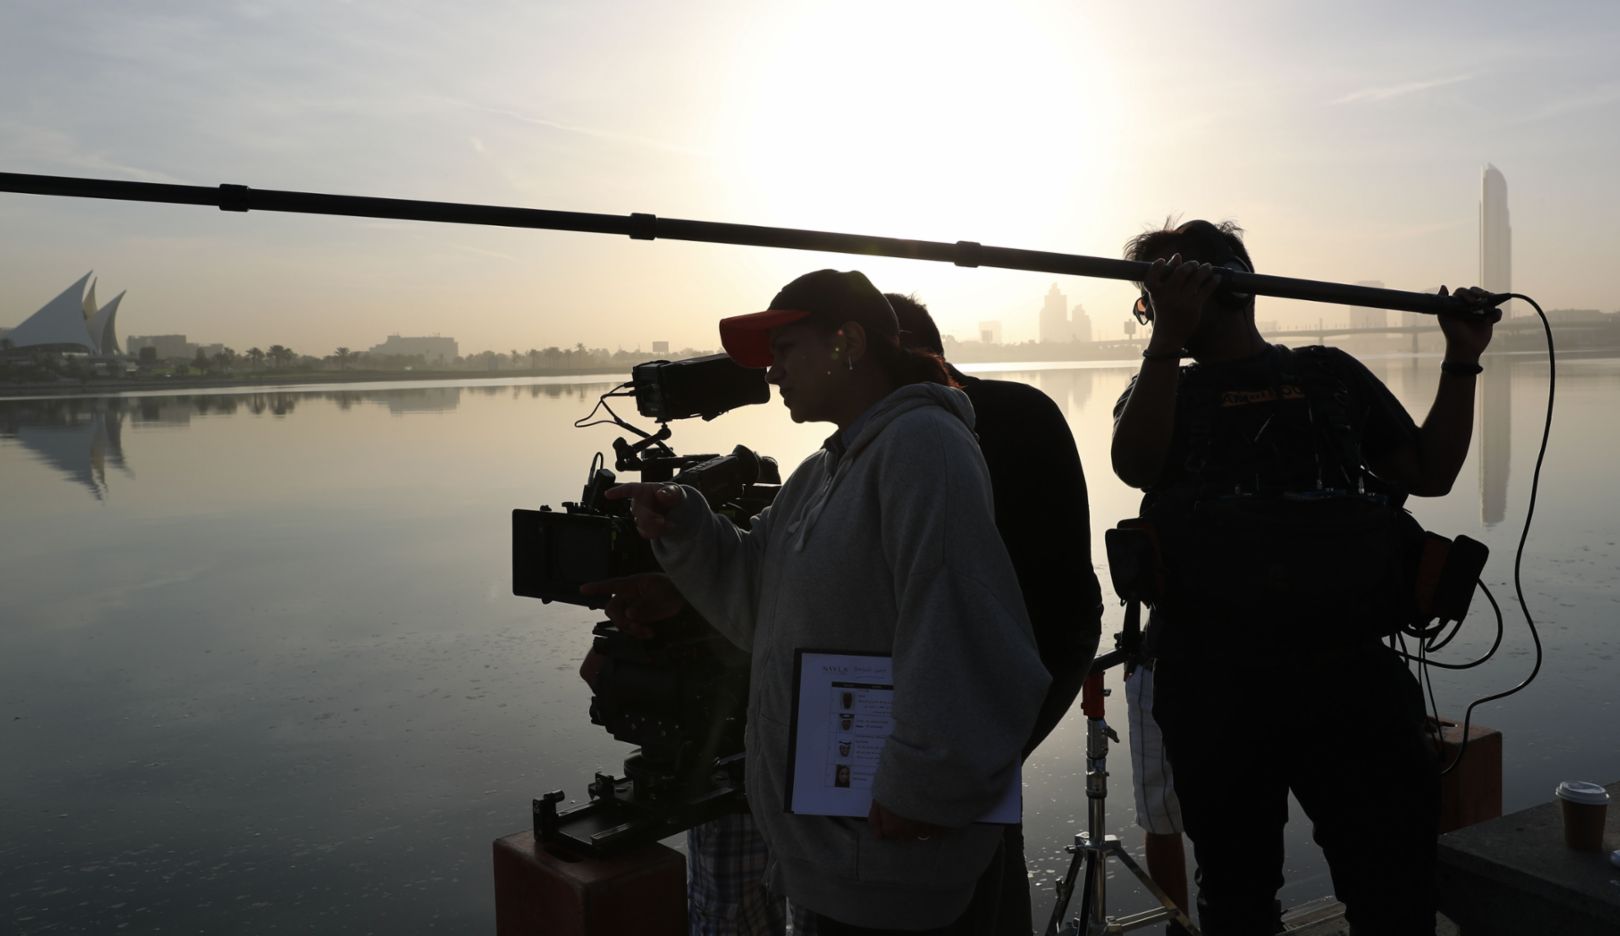 The film industry is still dominated by men. Here at Al Mamzar Beach in Dubai, Nayla Al Khaja is the only woman on the film team. Photo: Nayla Al Khaja Films